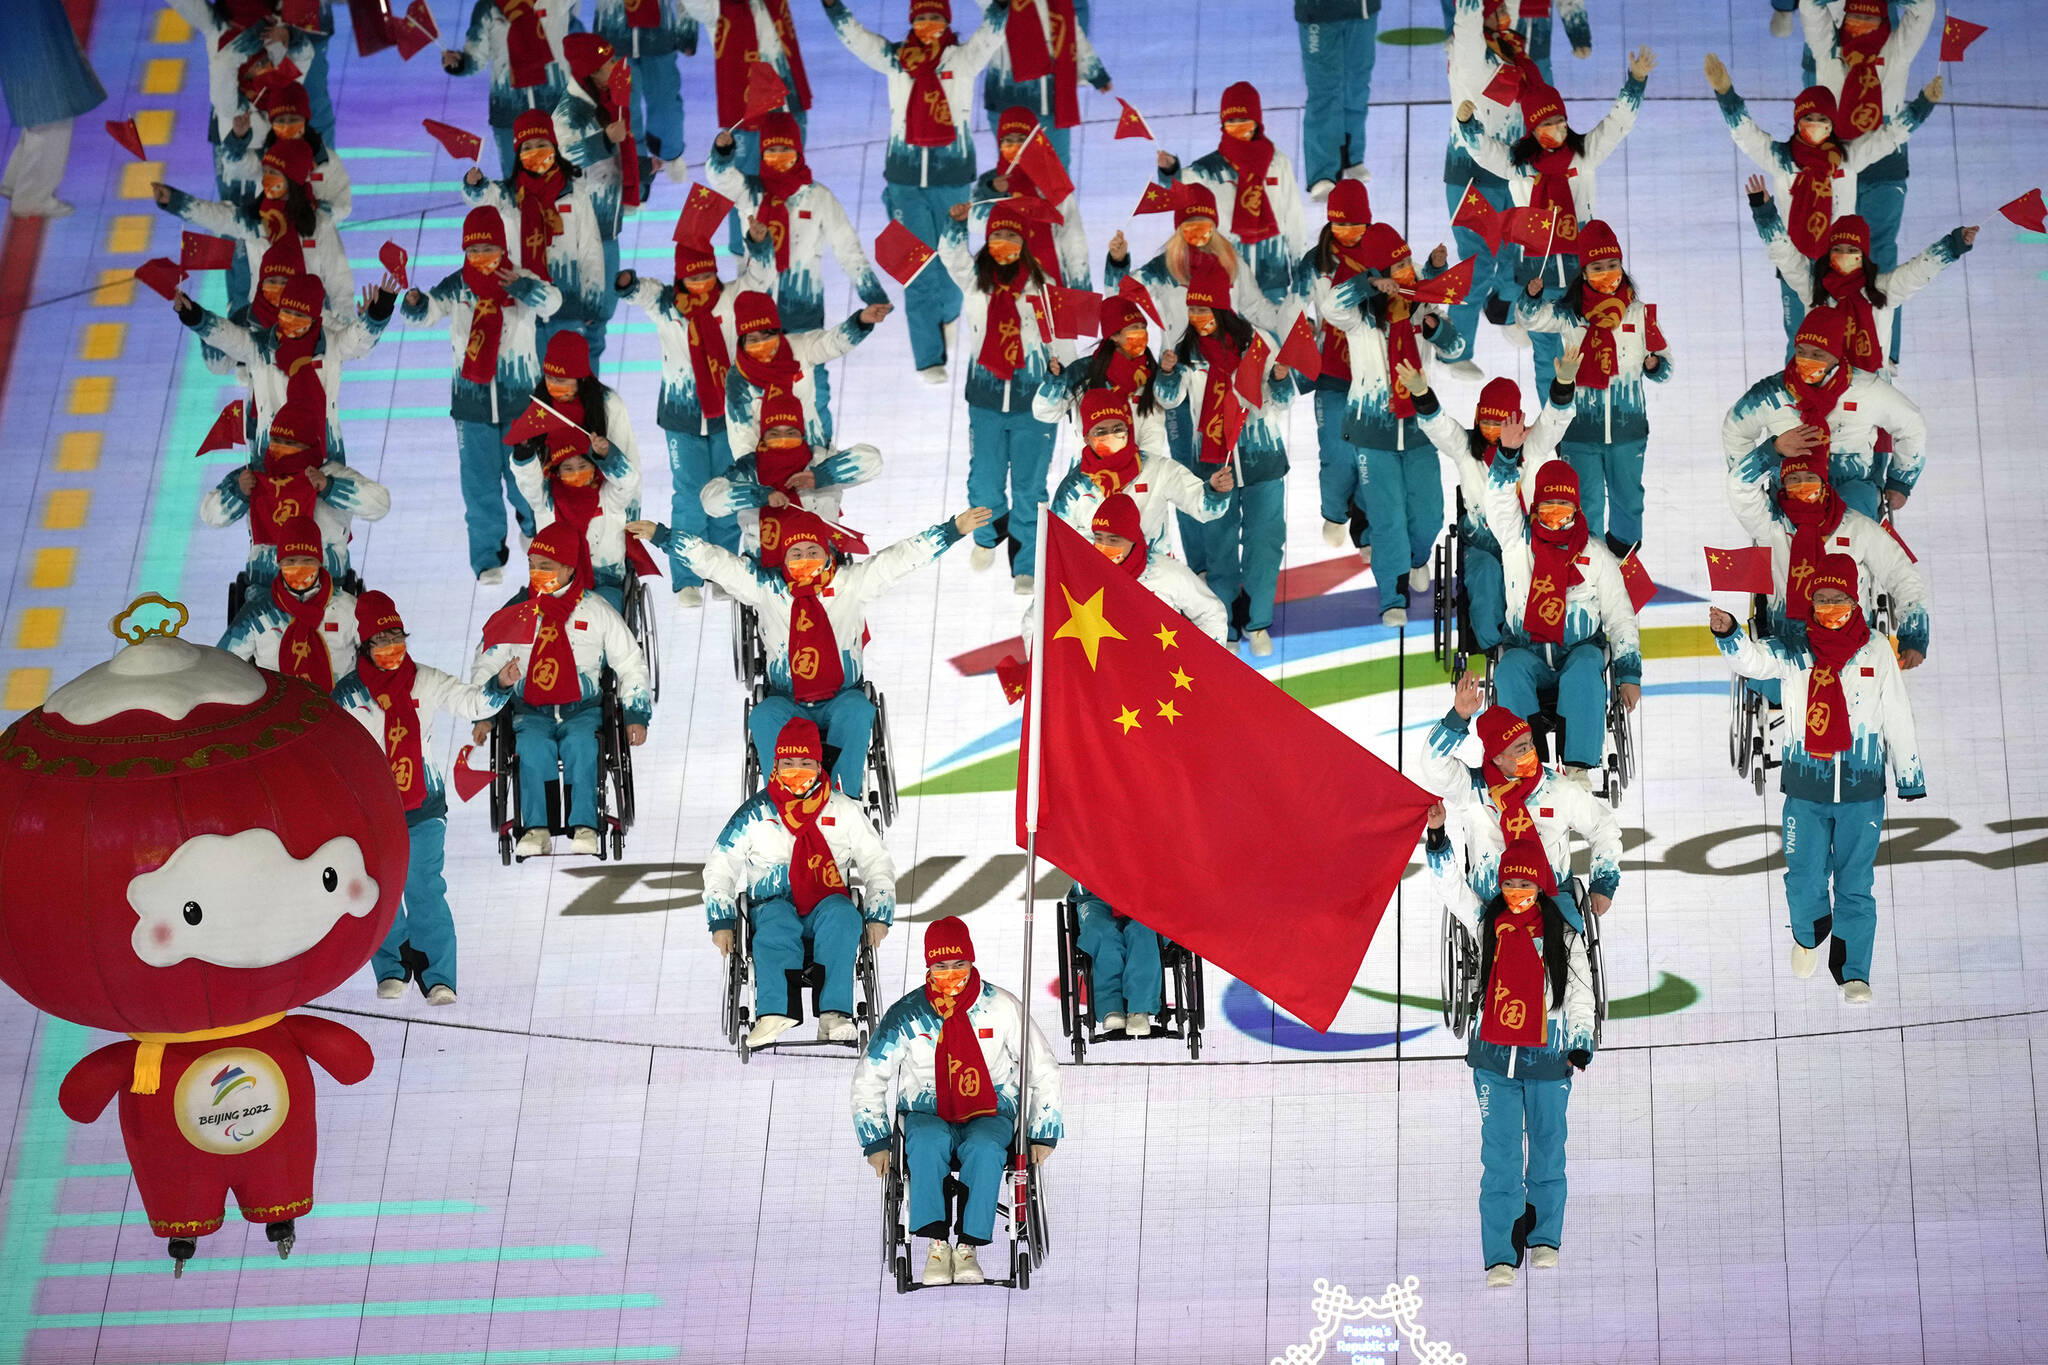 Guo Yujie and Wang Zhidong carry the flag of China as they make their entrance during the opening ceremony at the 2022 Winter Paralympics, Friday, March 4, 2022, in Beijing. (AP Photo/Dita Alangkara)